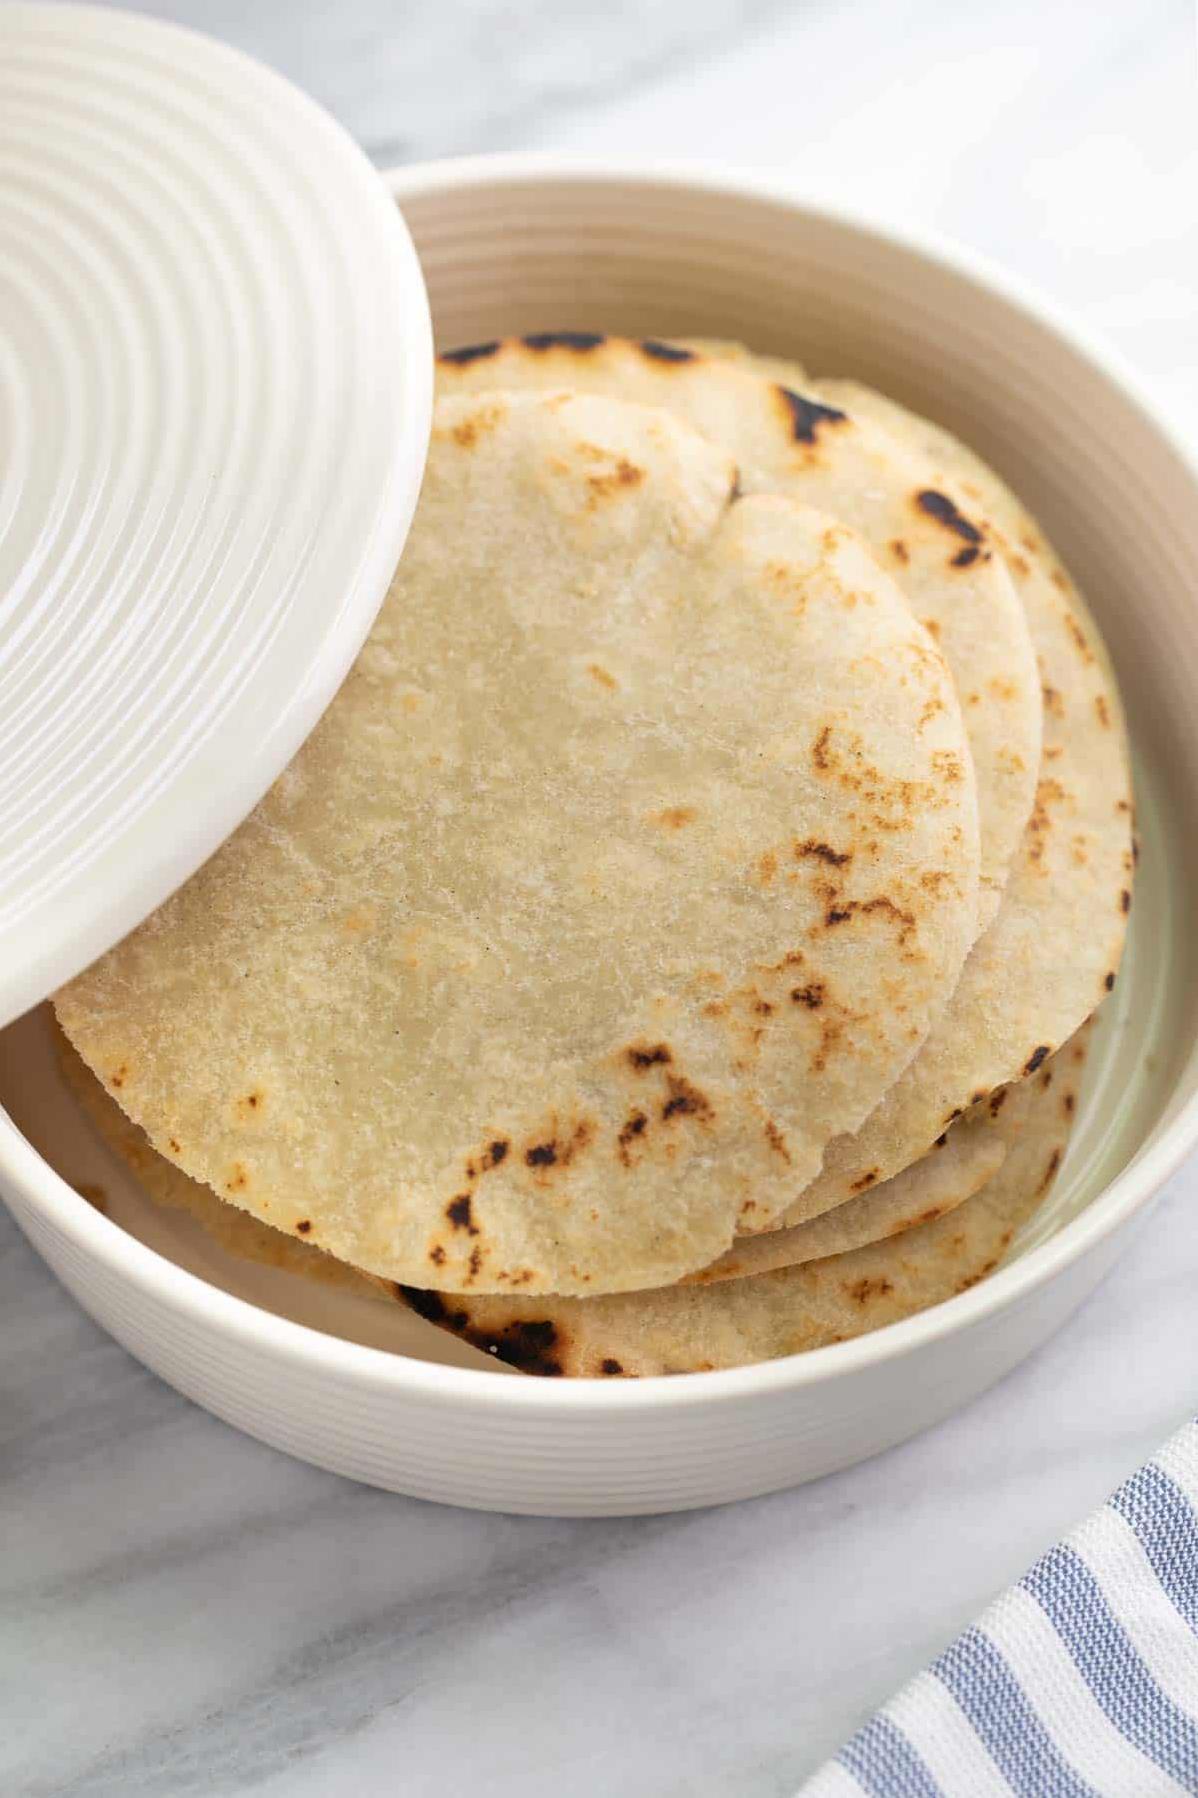  Enjoy these delicious and healthy gluten-free tortillas with your favorite filling!